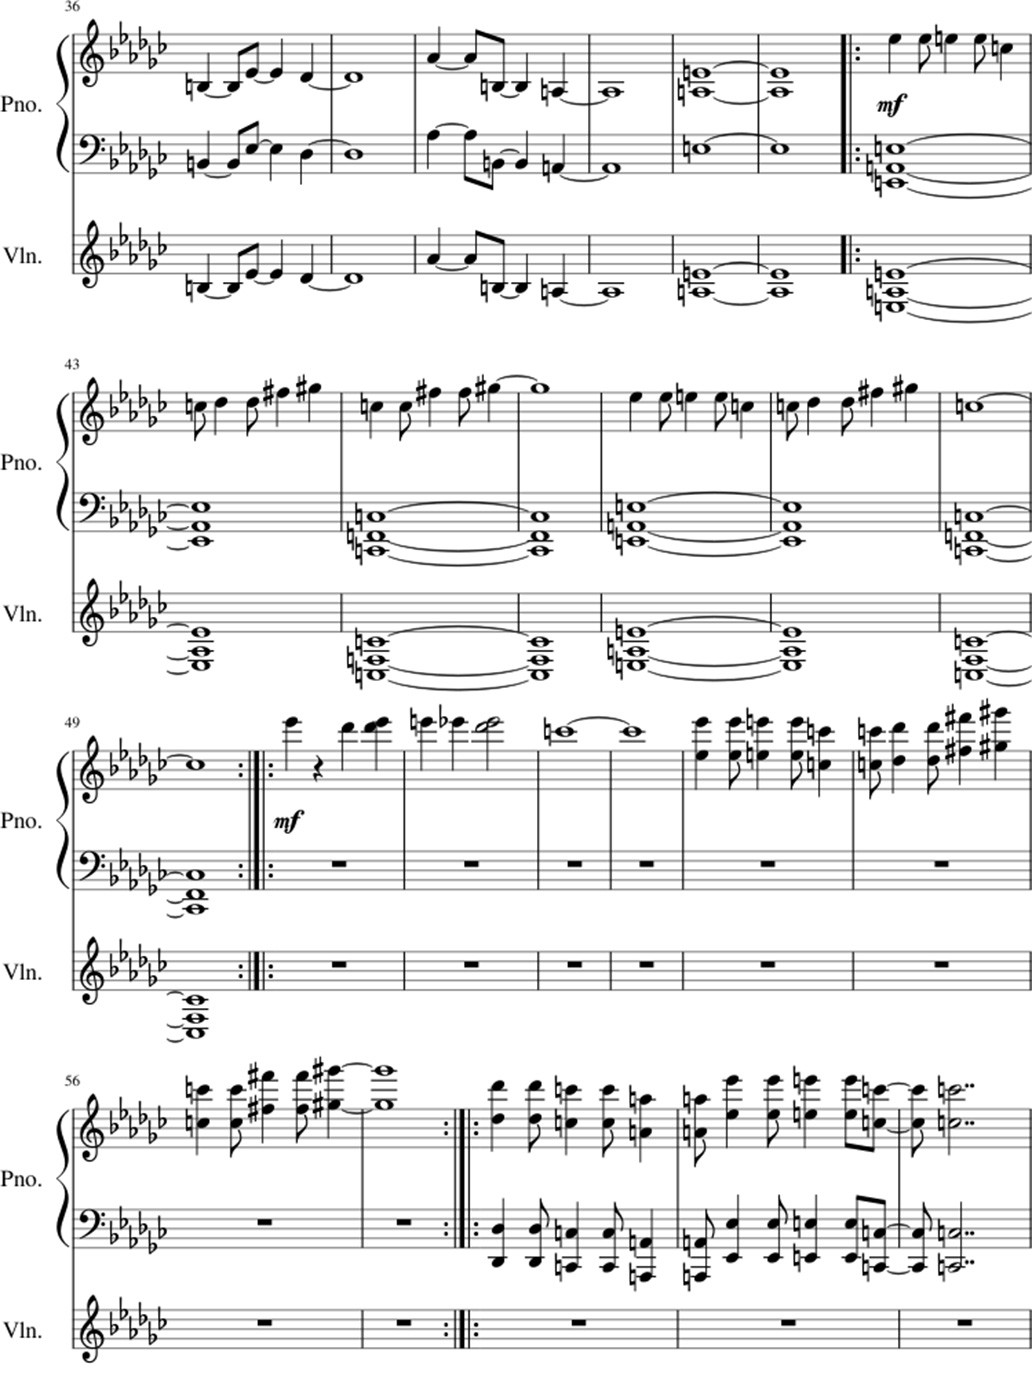 Old Souls sheet music notes 2